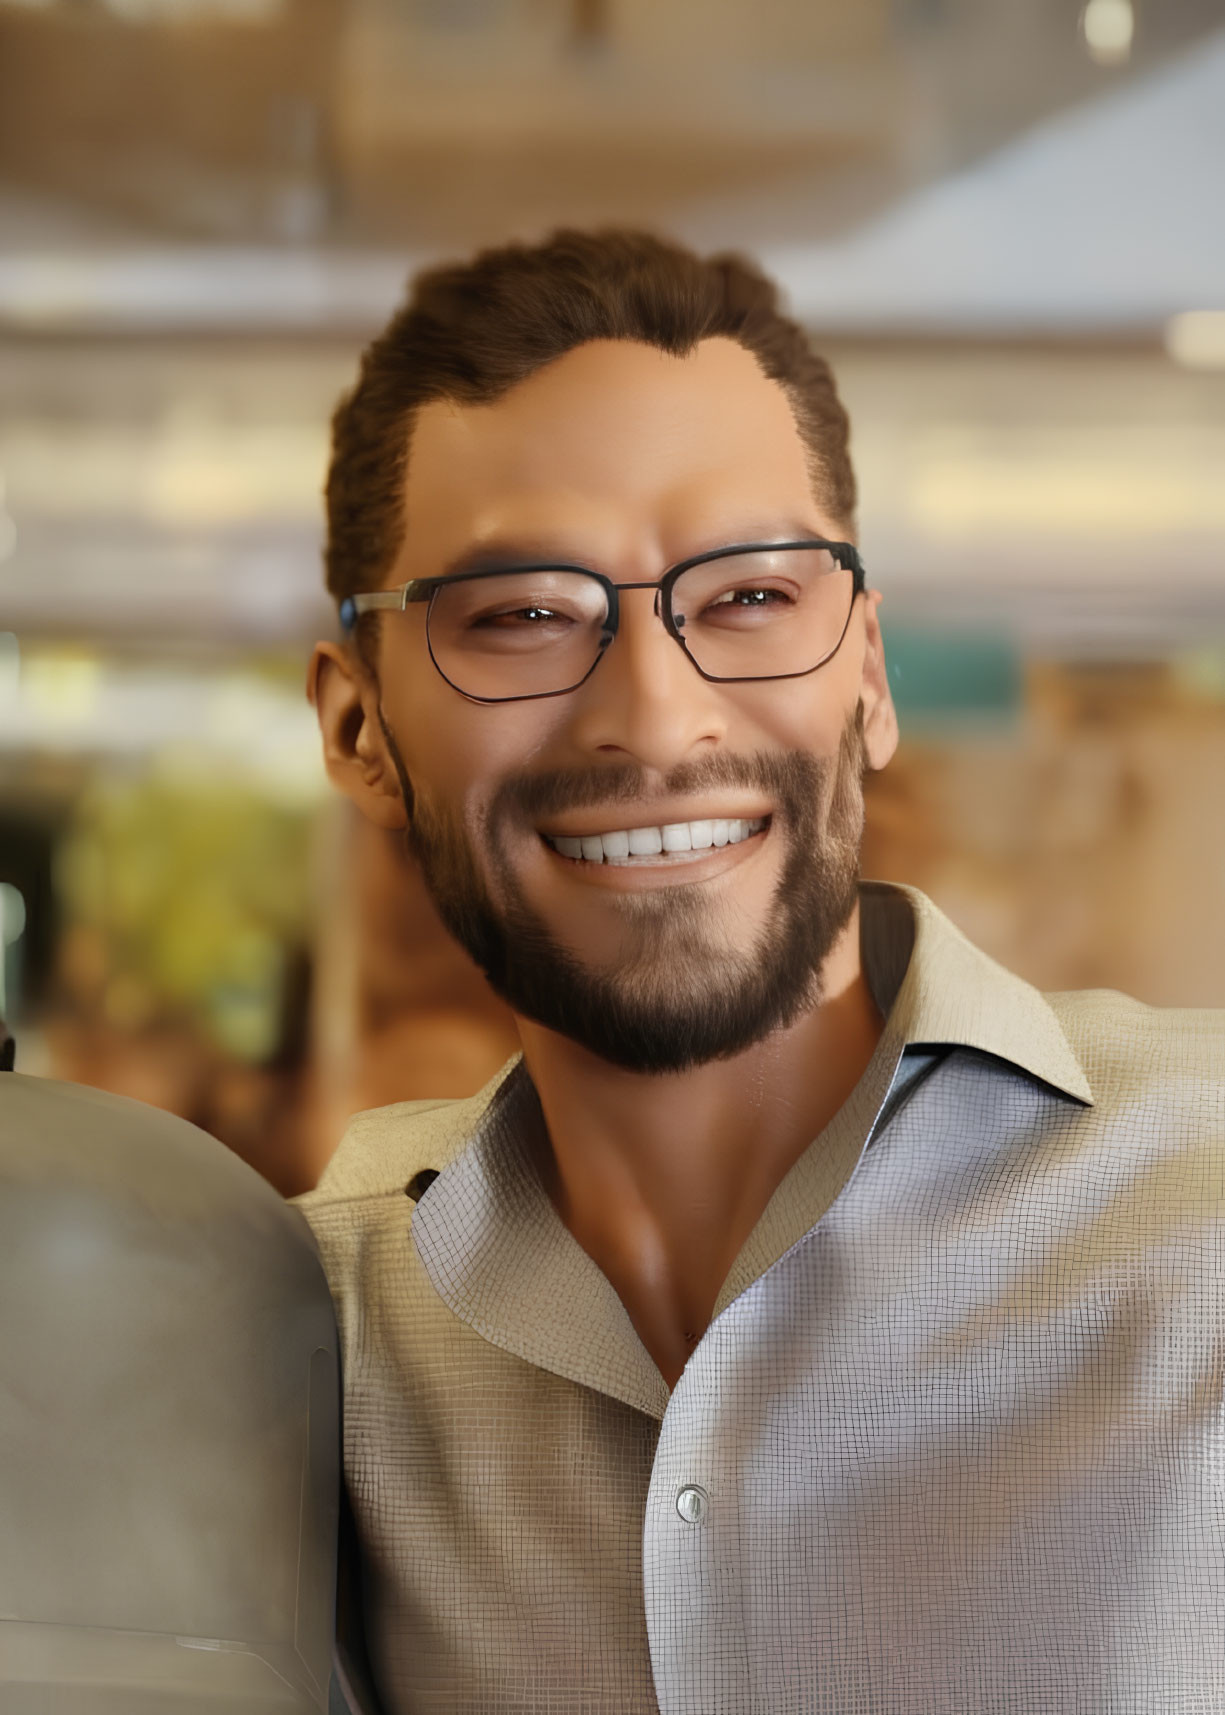 Smiling bearded man with glasses in stylized portrait